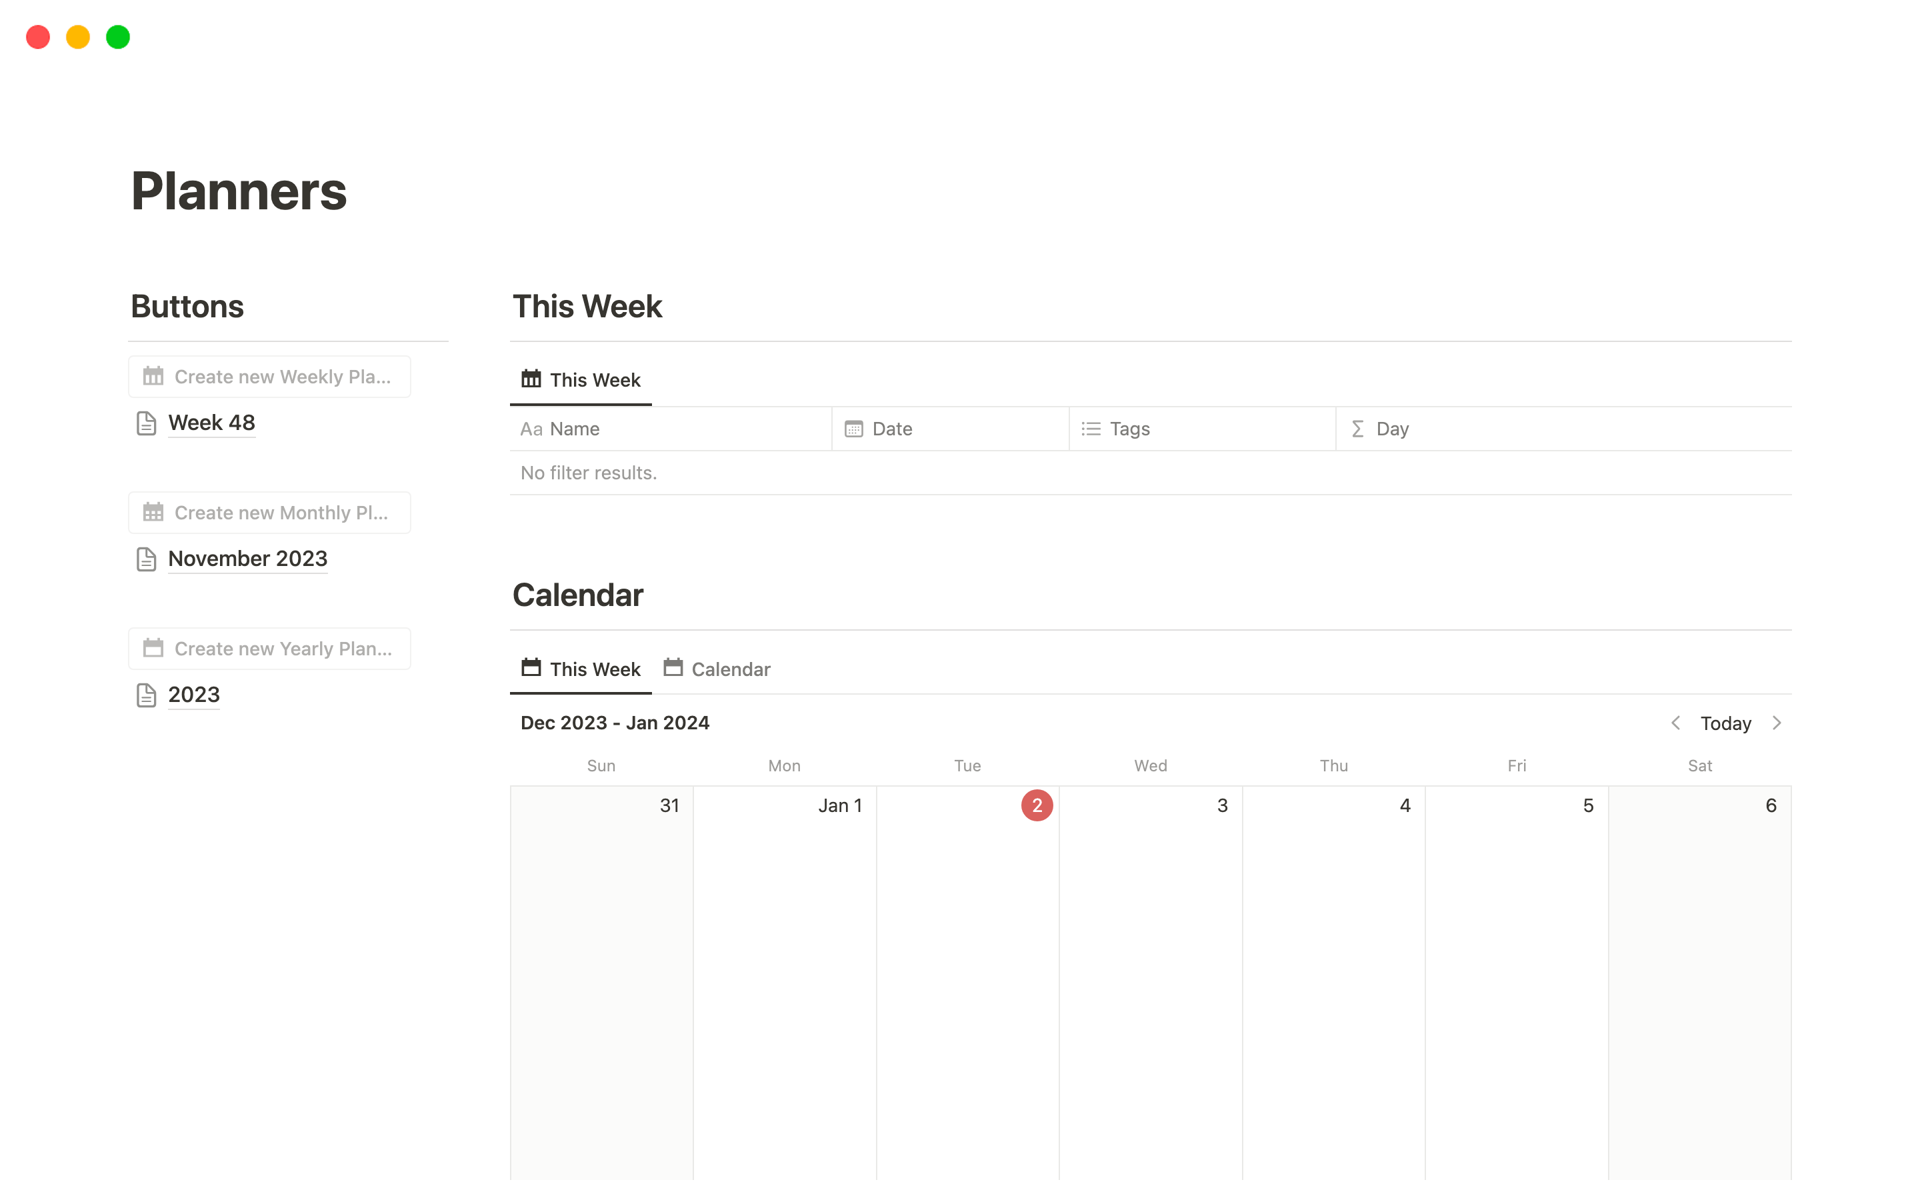 Plan and organize your schedules and tasks on a daily, weekly, monthly, and yearly basis with pre-designed Notion planner templates.